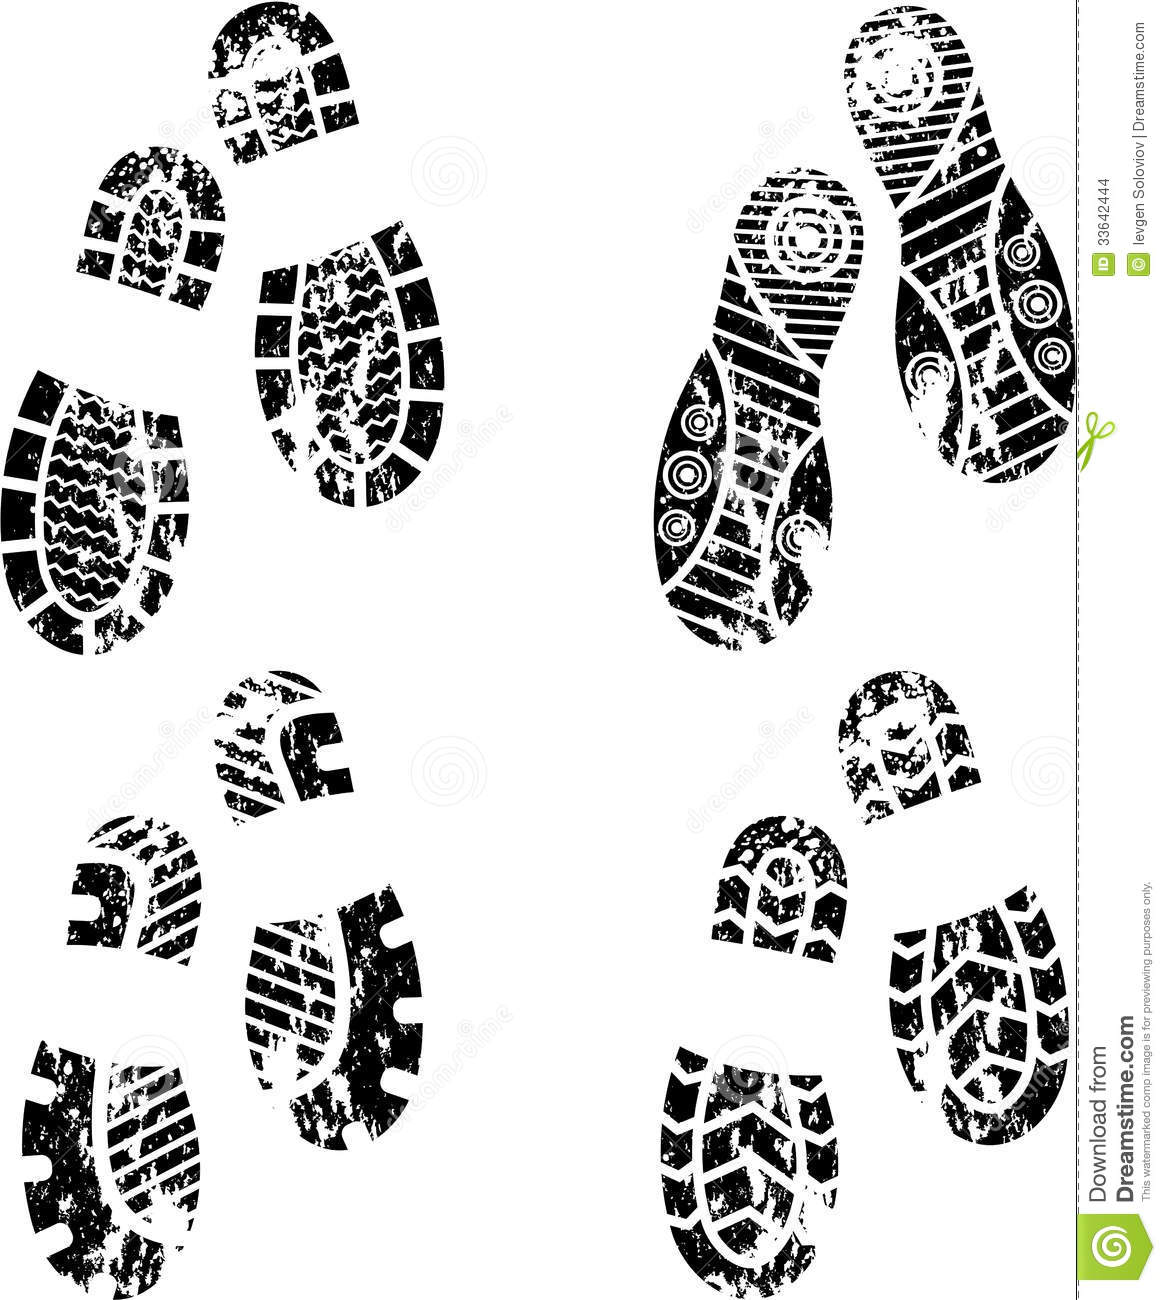 Shoes Silhouette Stock Images   Image  33642444